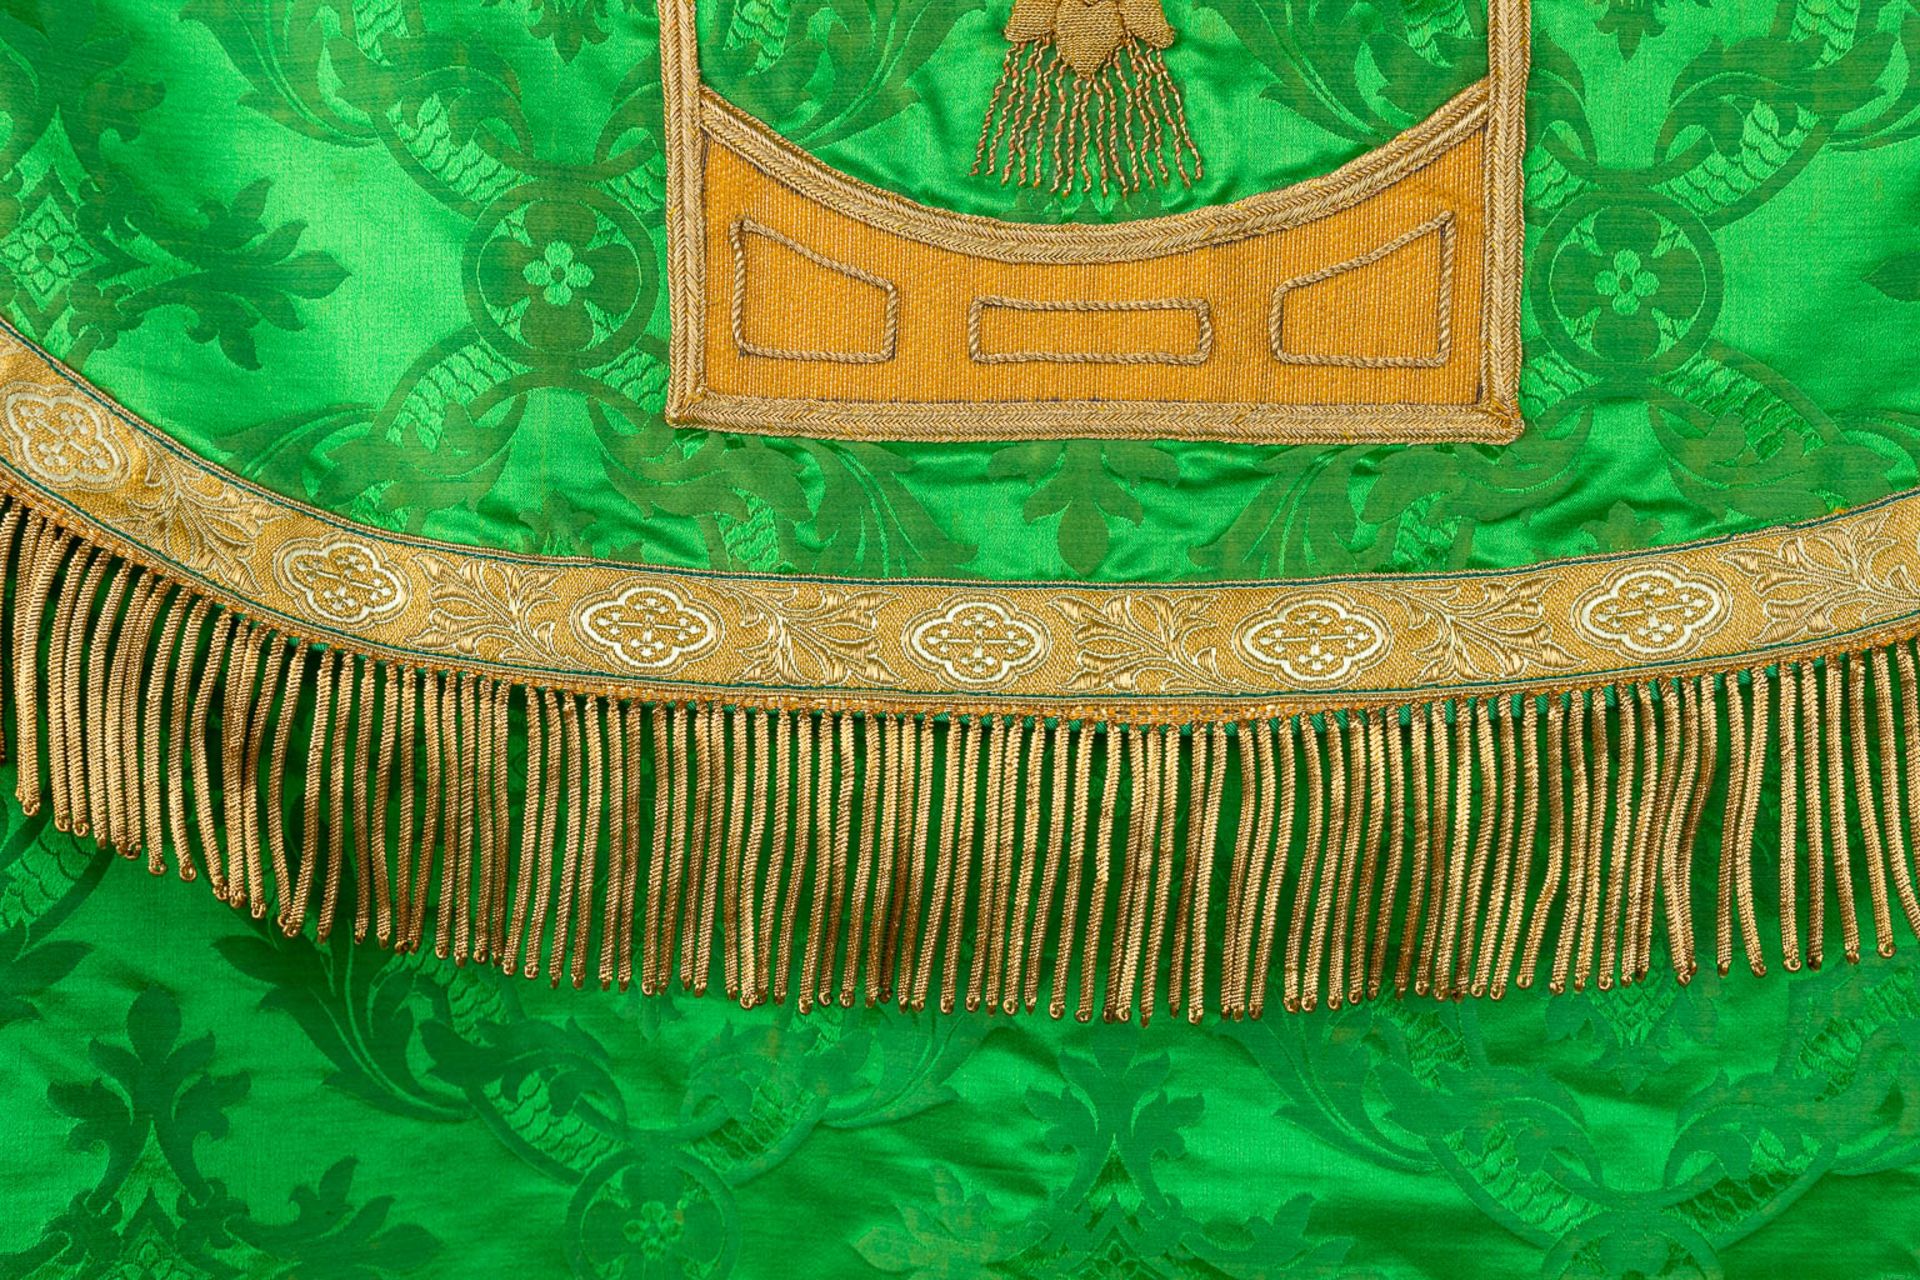 A Cope and Humeral Veil, finished with thick gold thread and green fabric and the IHS logo. - Image 5 of 14